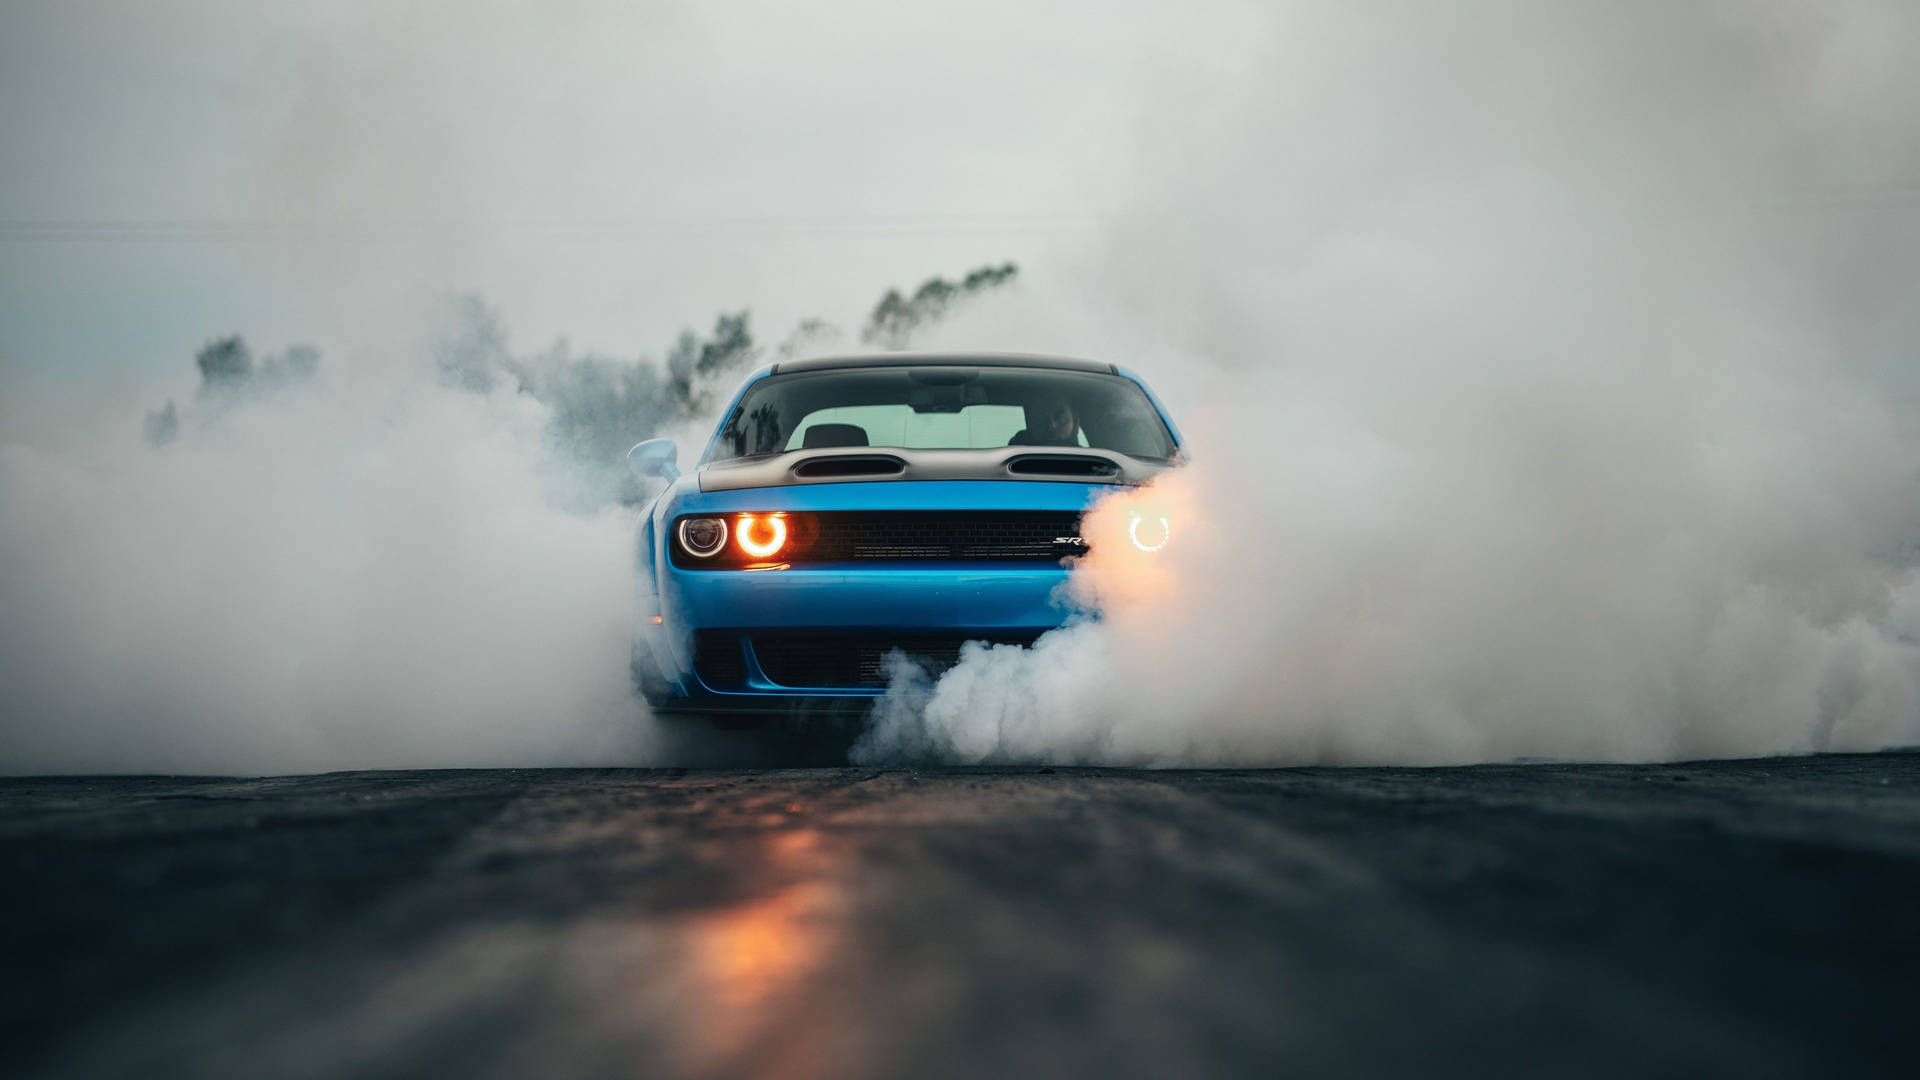 Power Unleashed - Dodge Challenger Erupting from Smoke Wallpaper